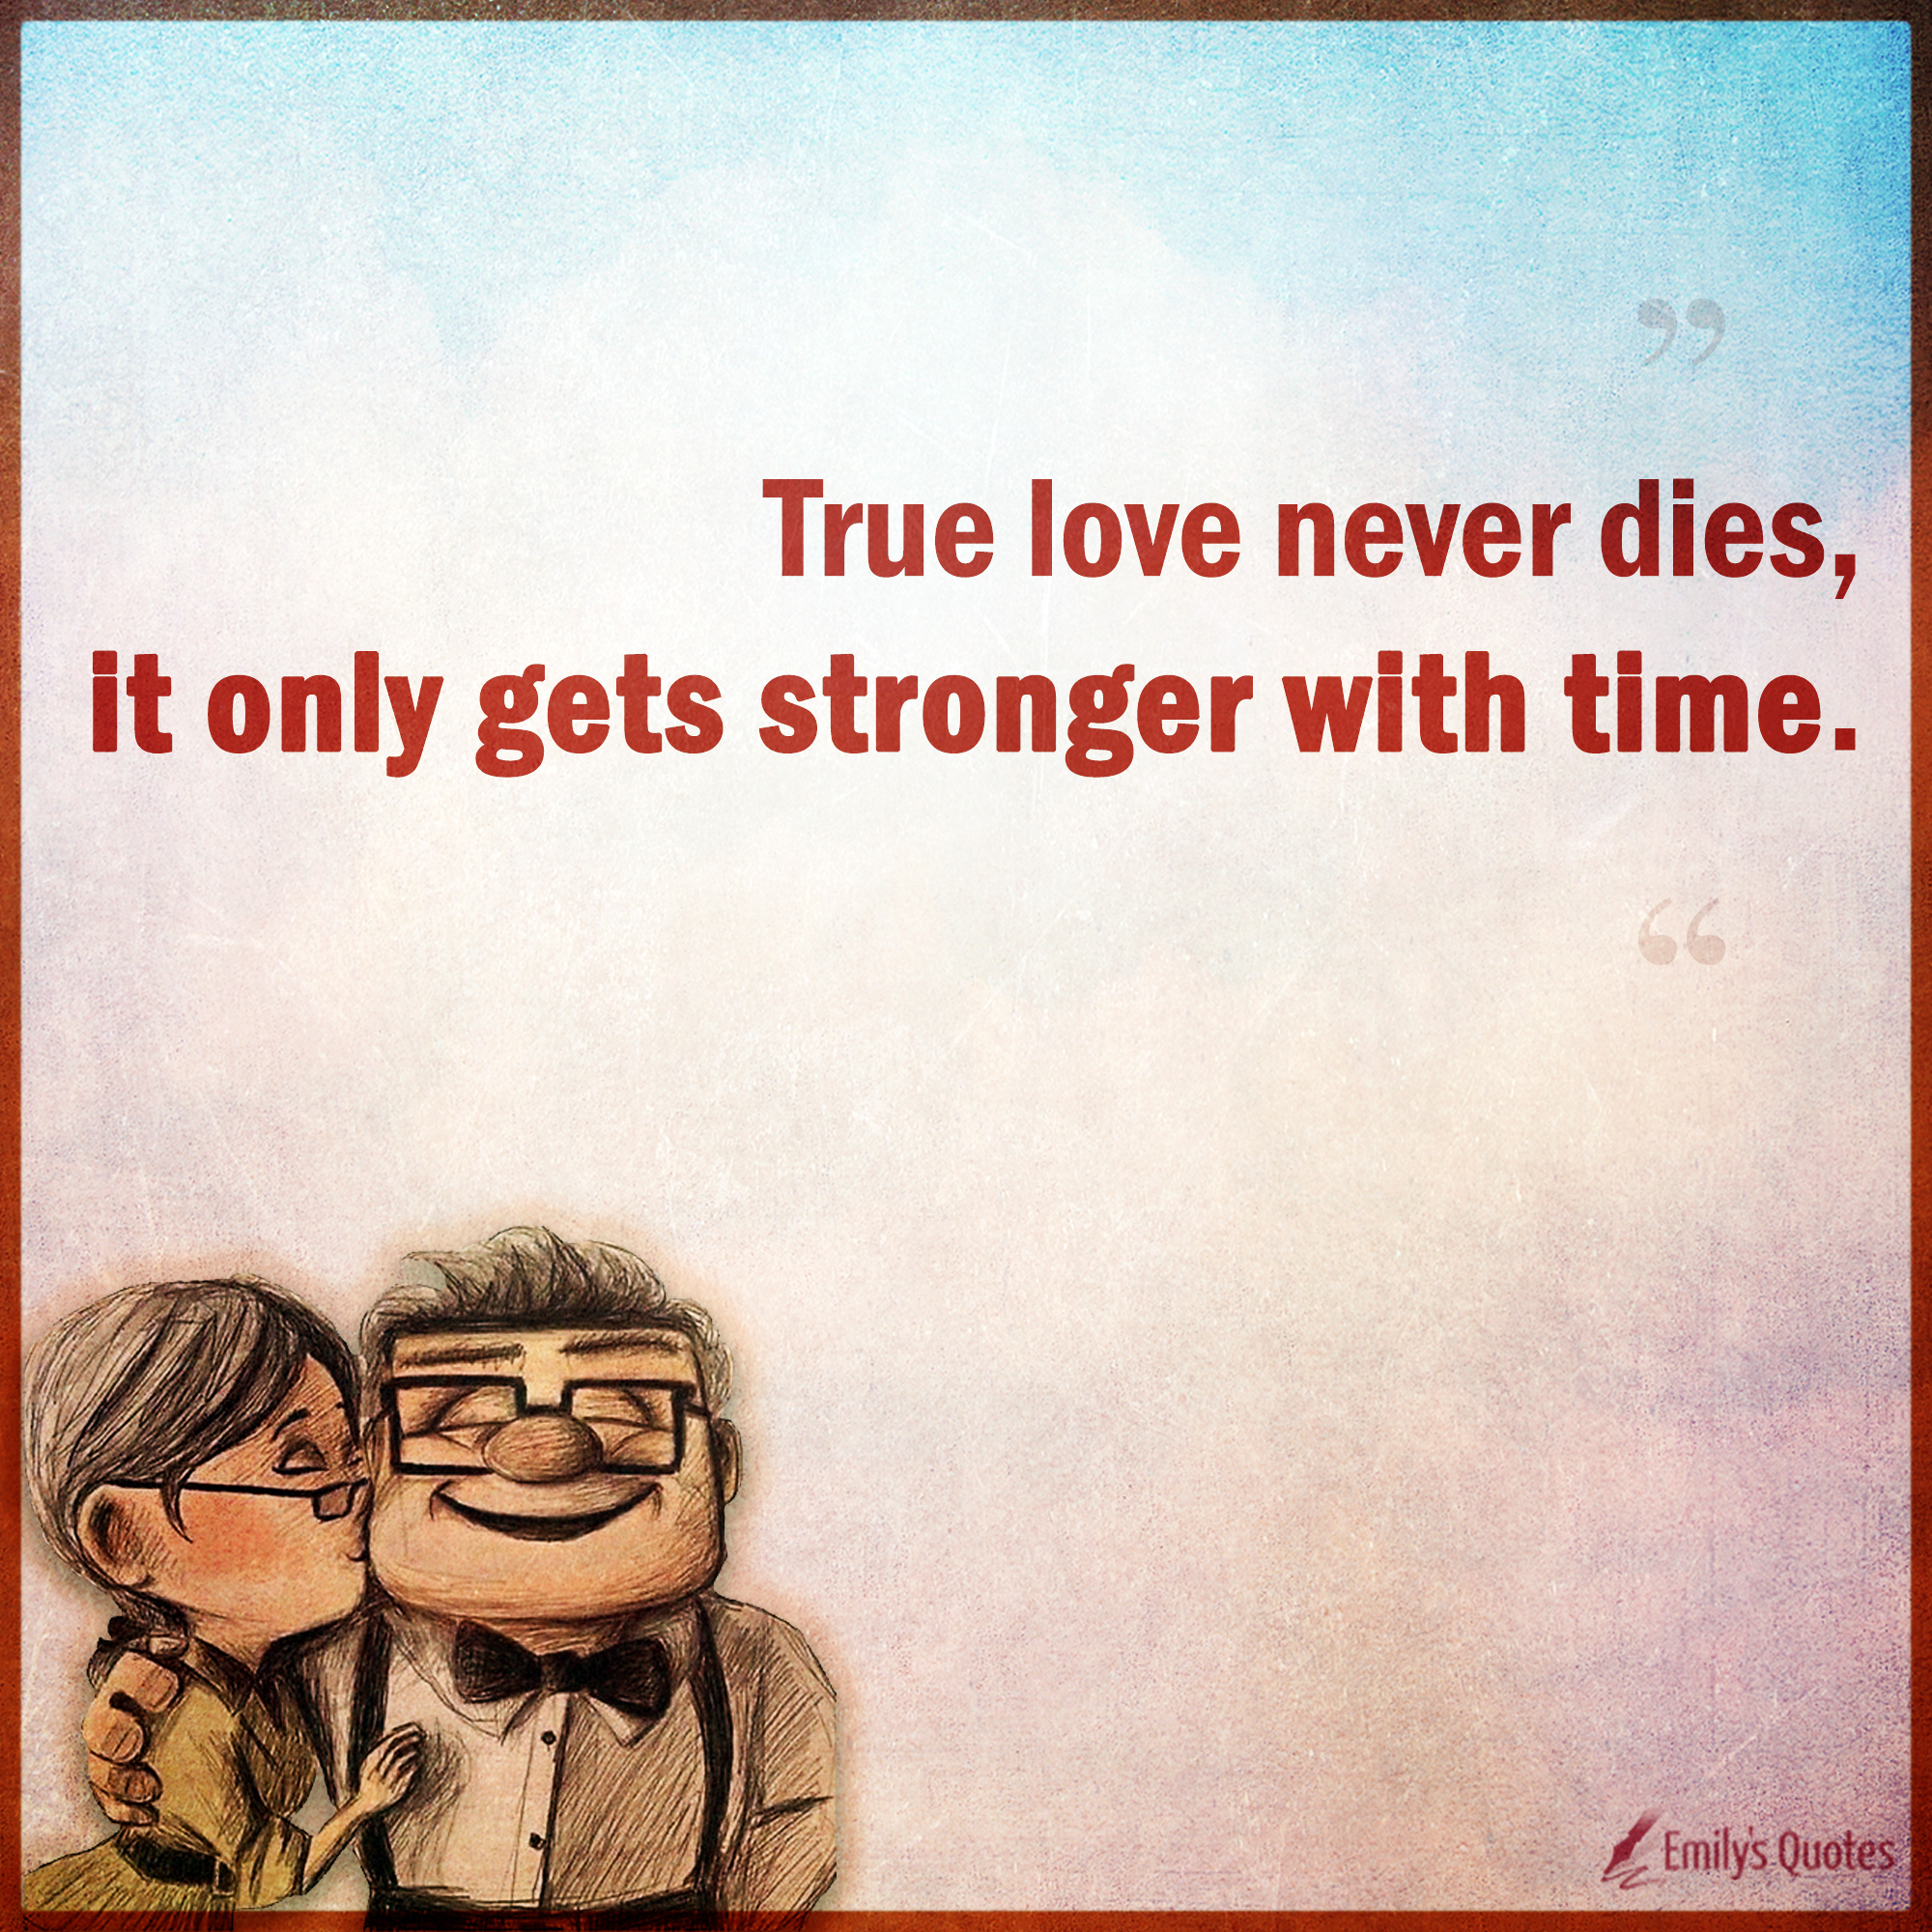 True love never dies, it only gets stronger with time | Popular ...